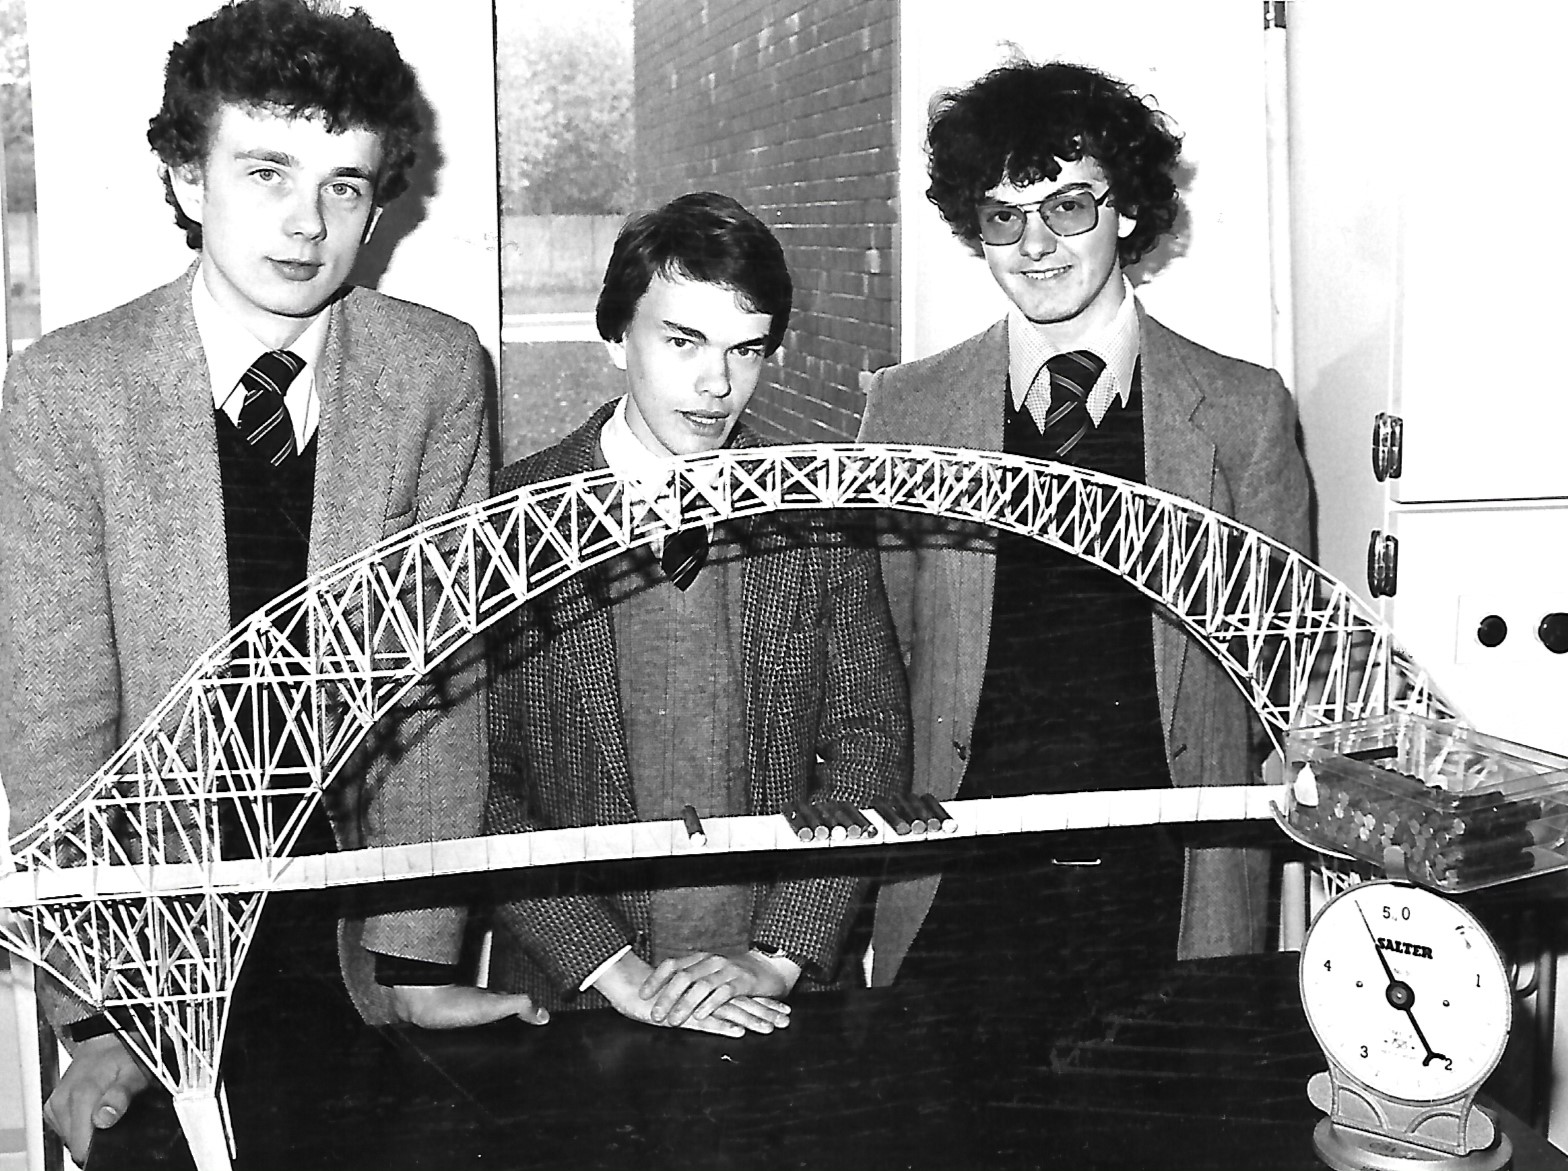 Students at King George V Grammar School - later to become King George V Sixth Form College - show off their impressive model bridge building skills